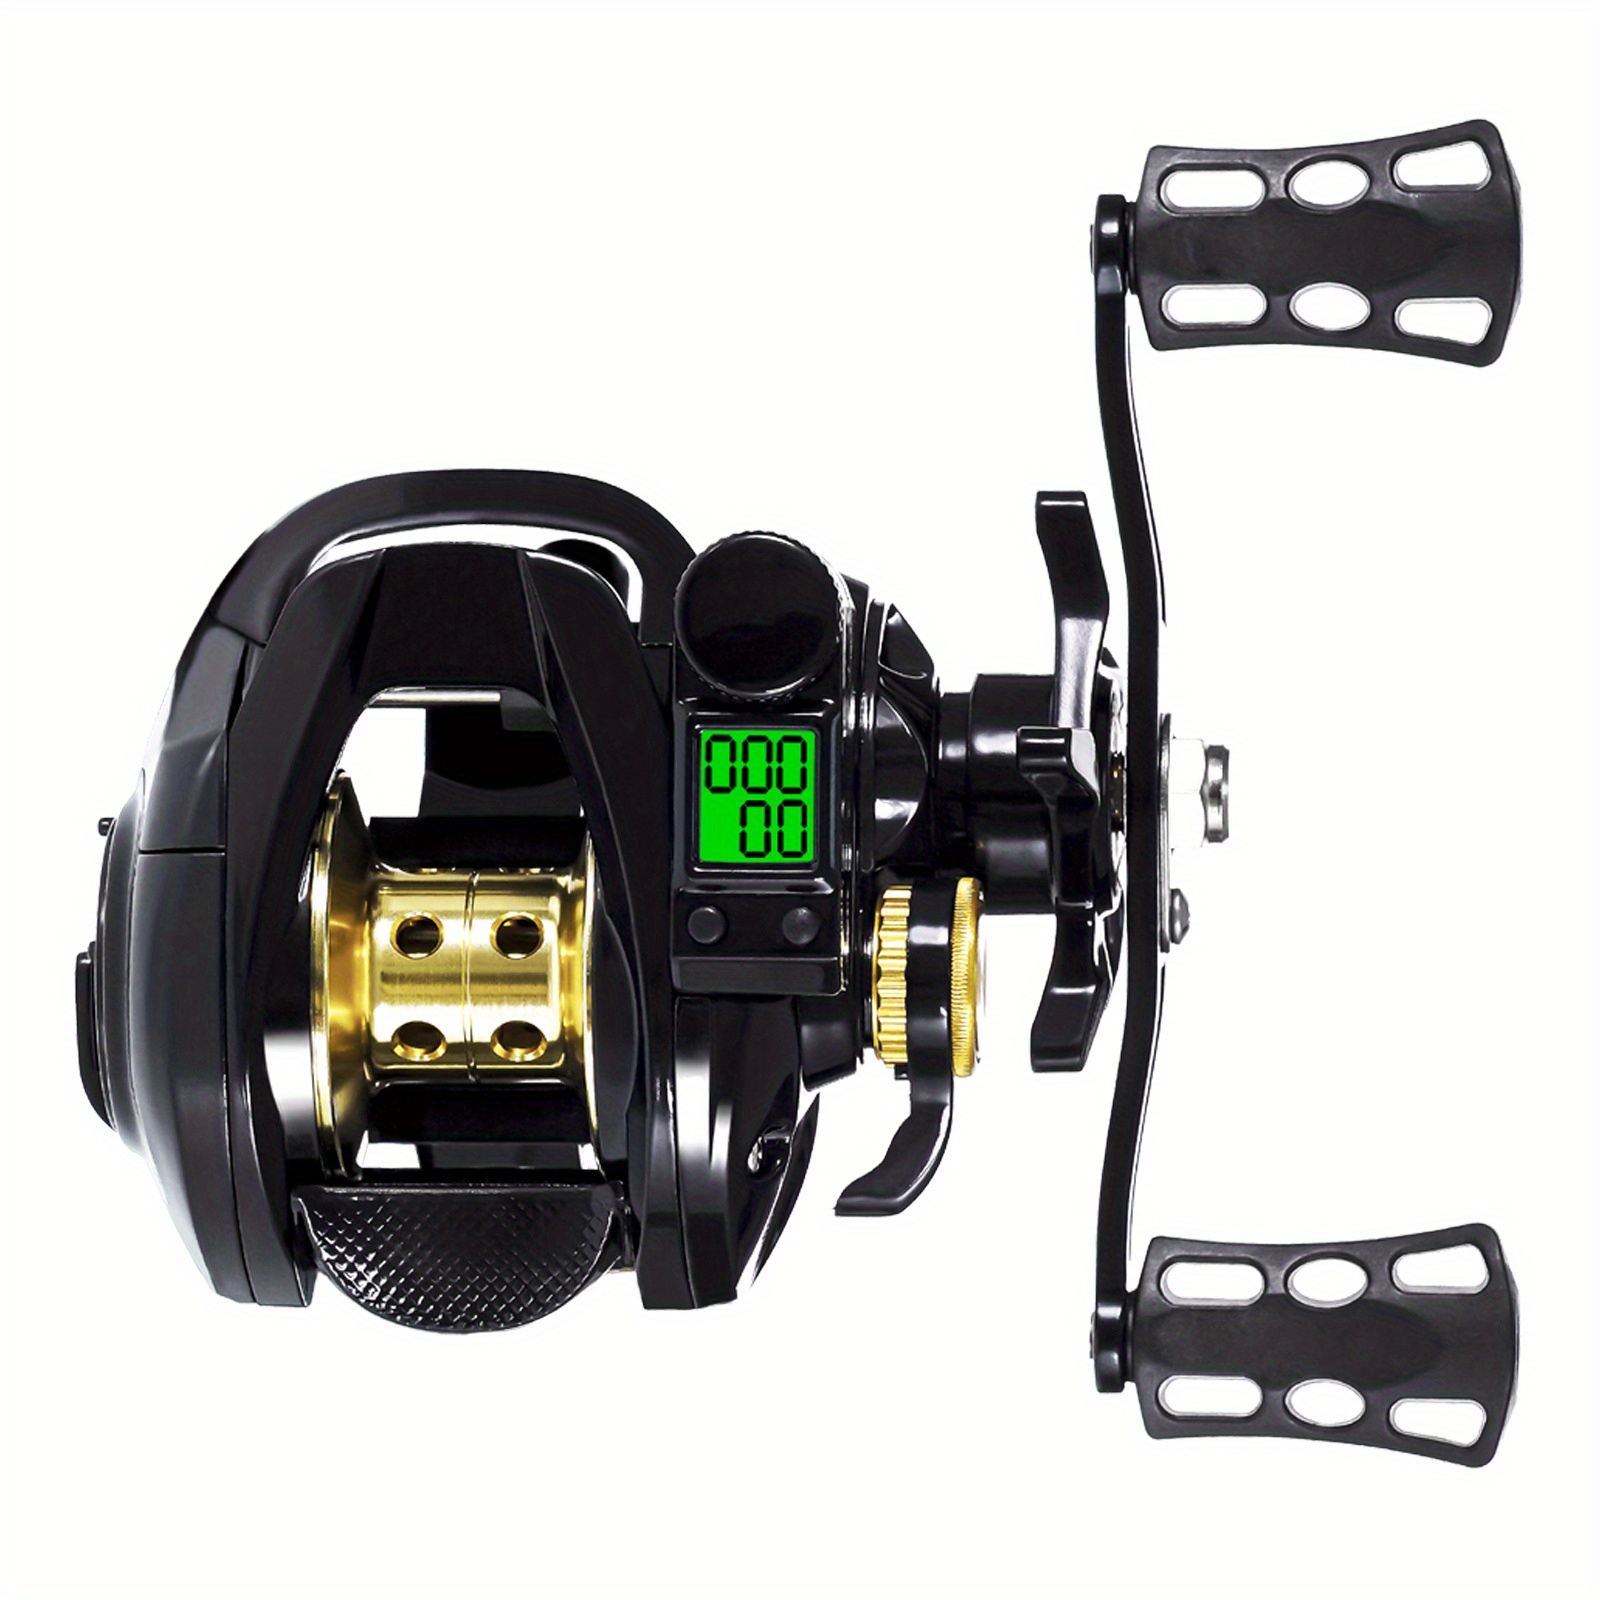 Xtreme Fishing Shop Birzebbuga - Coming Soon !!!! The new Shimano Plemio 3000  Electric reel with the unbeatable price of €395. Available on preorder.  Visit our Online Store for more info.